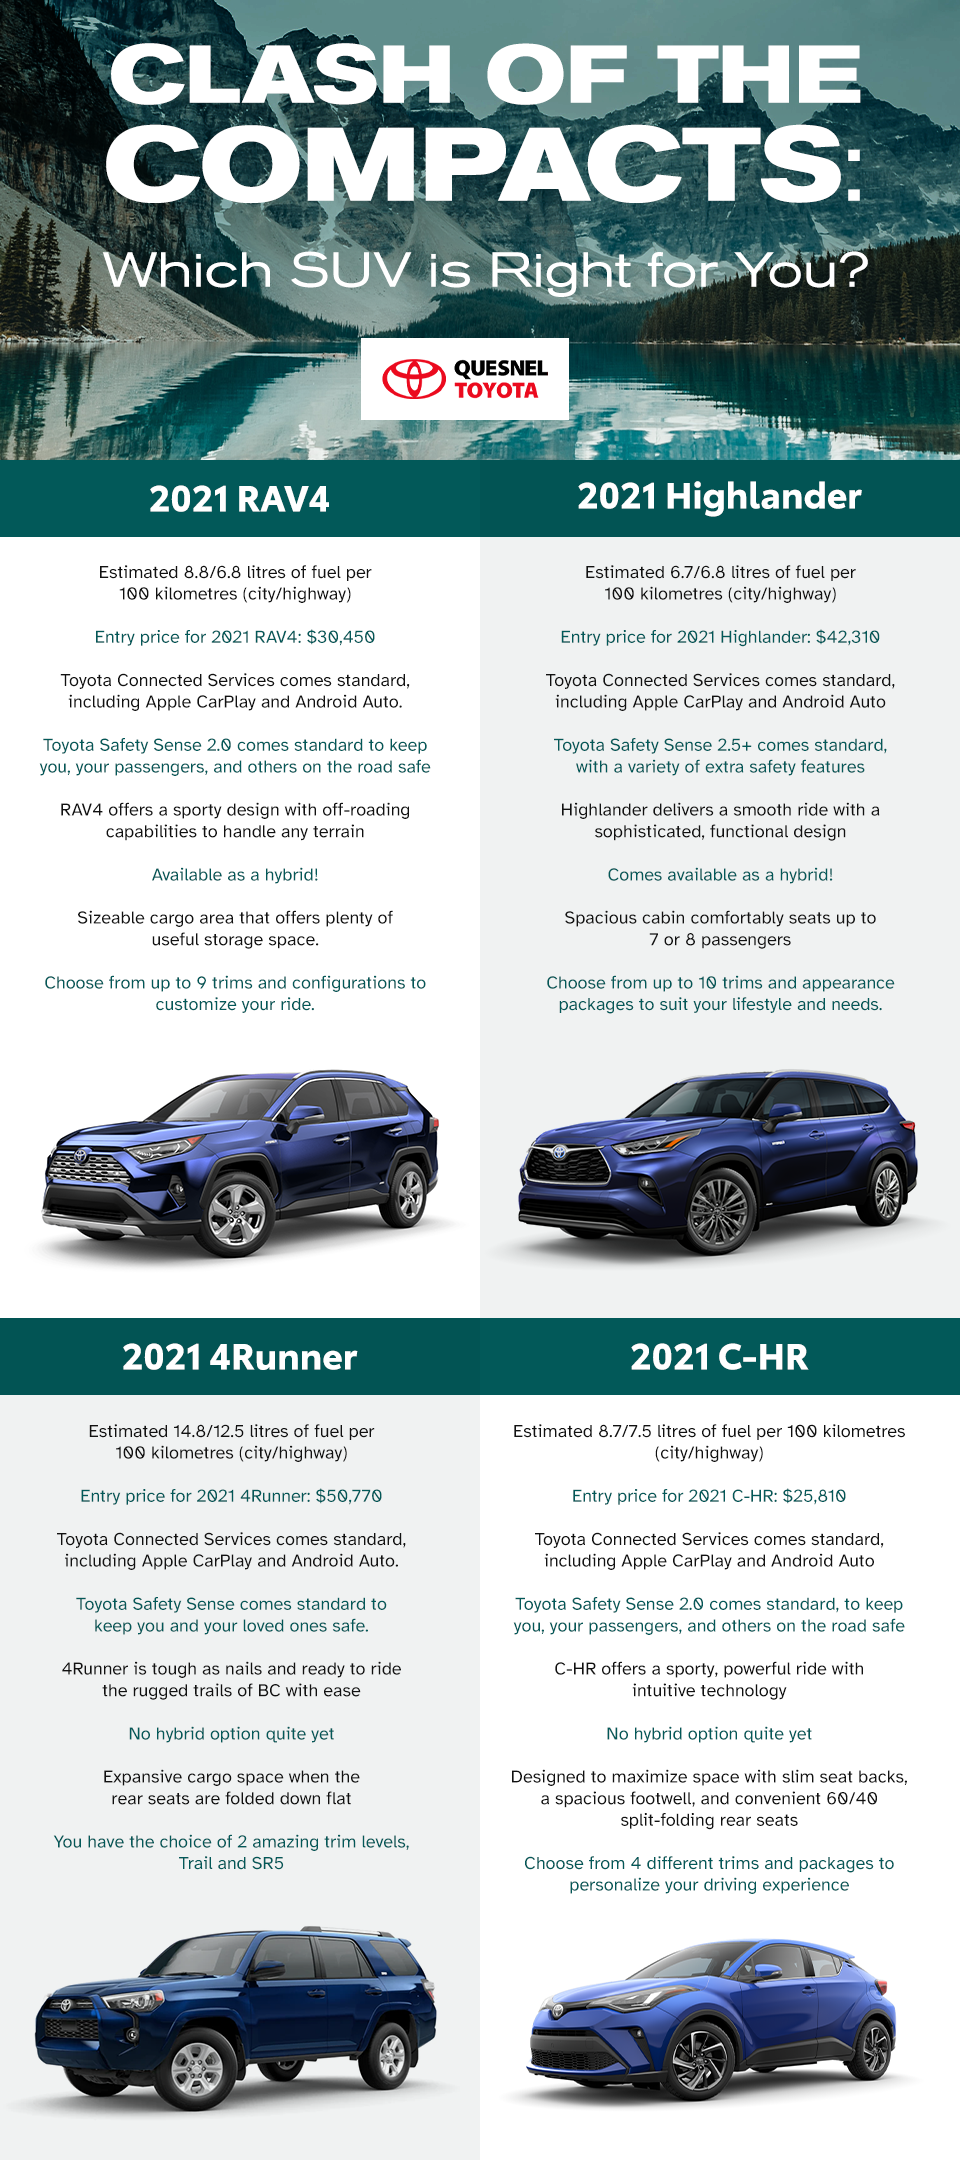 Clash of the Compacts: Which SUV is Right for You - Infographic